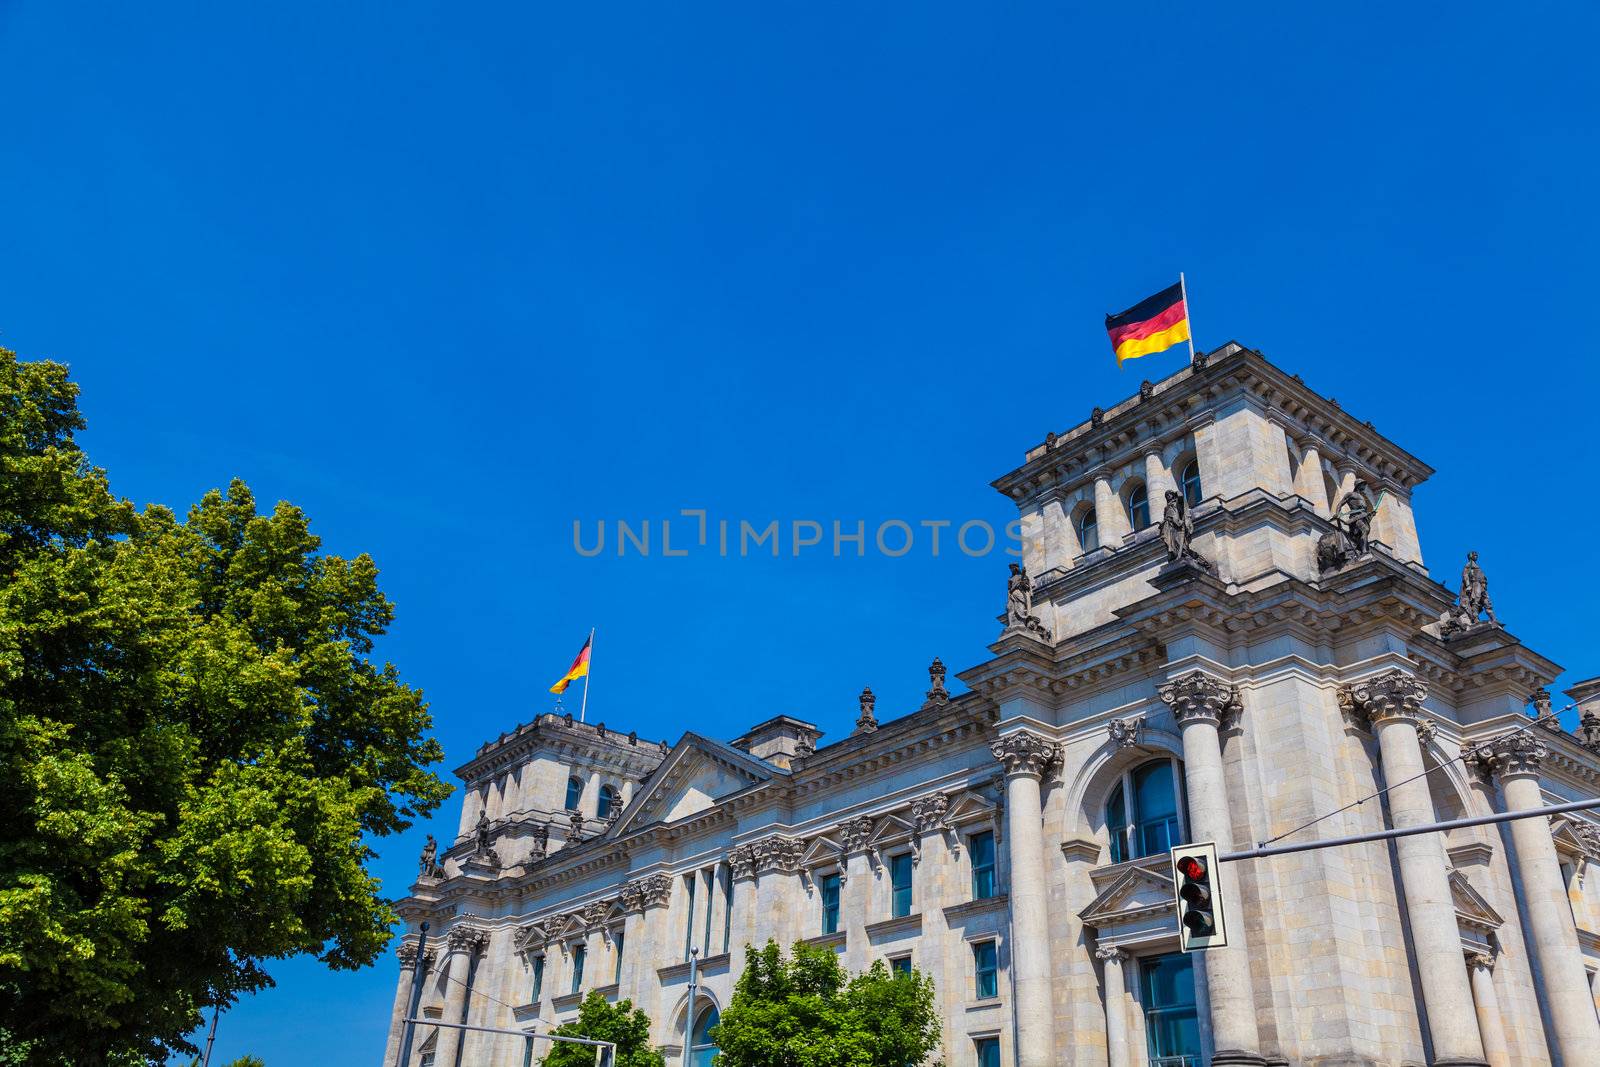 The Reichstag building in Berlin, Germany